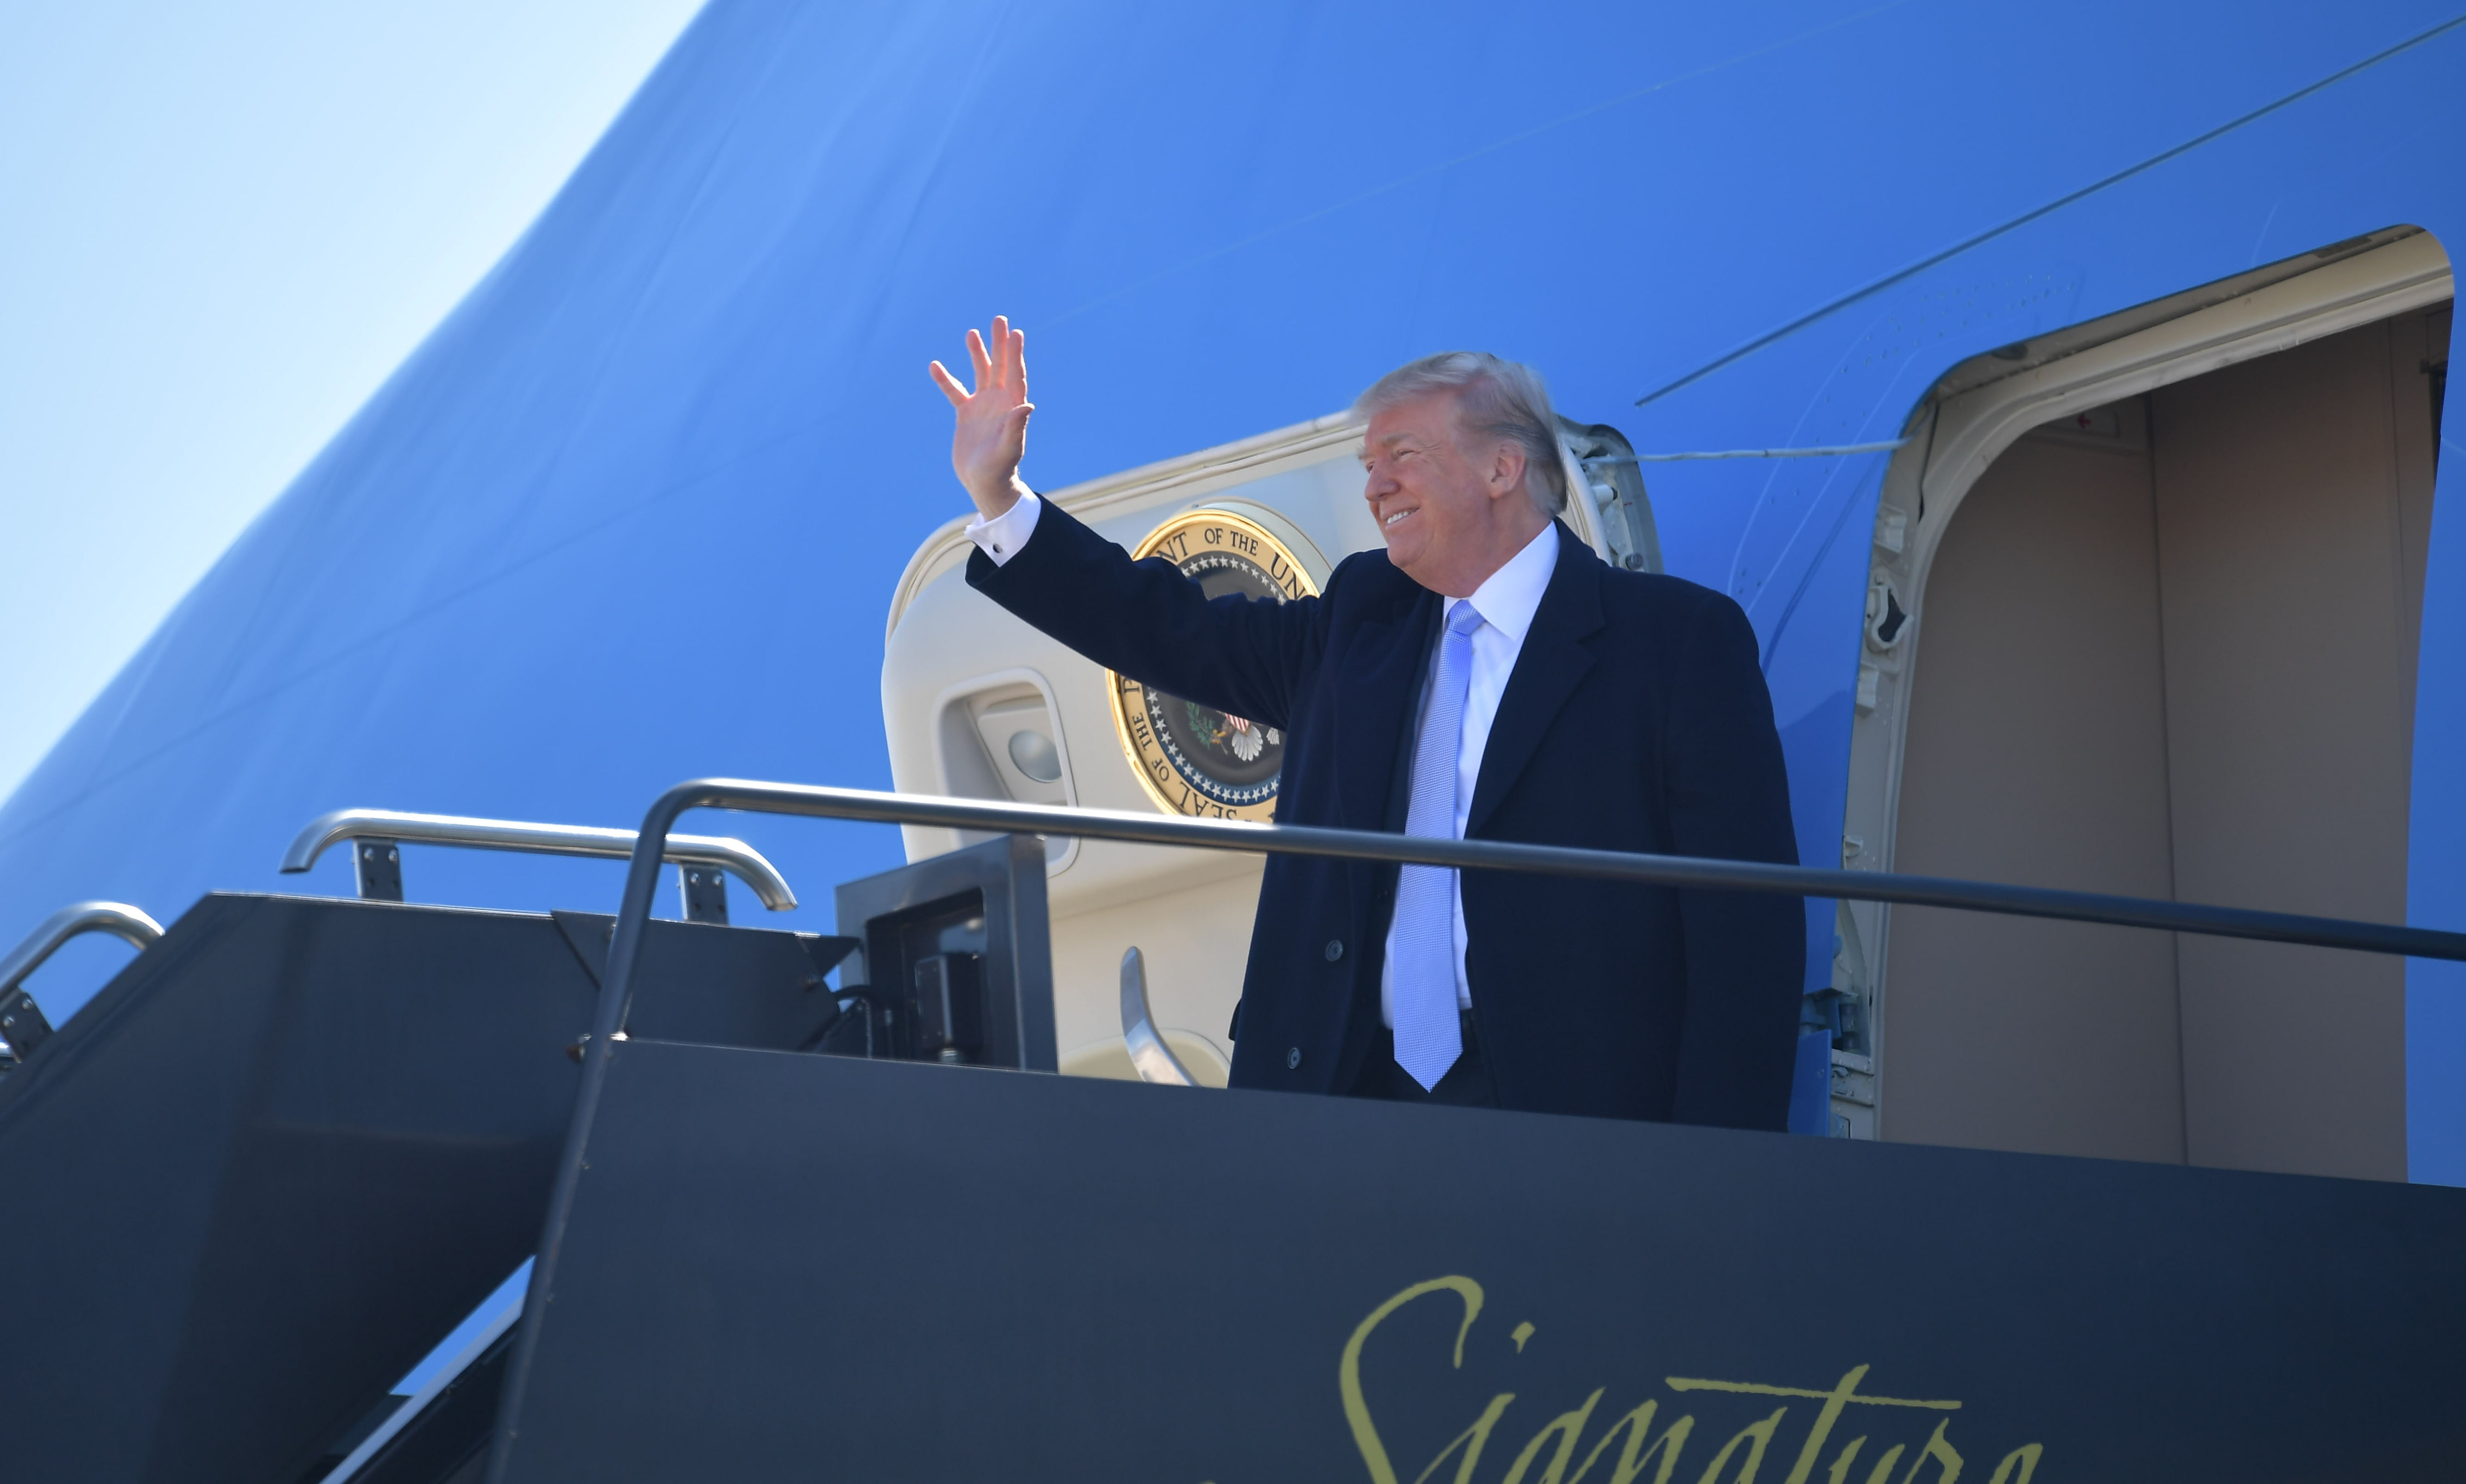 US President Donald Trump steps off Air Force One upon arrival at St. Louis Lambert International Airport in St. Louis, Missouri on March 14, 2018 (MANDEL NGAN/AFP/Getty Images)